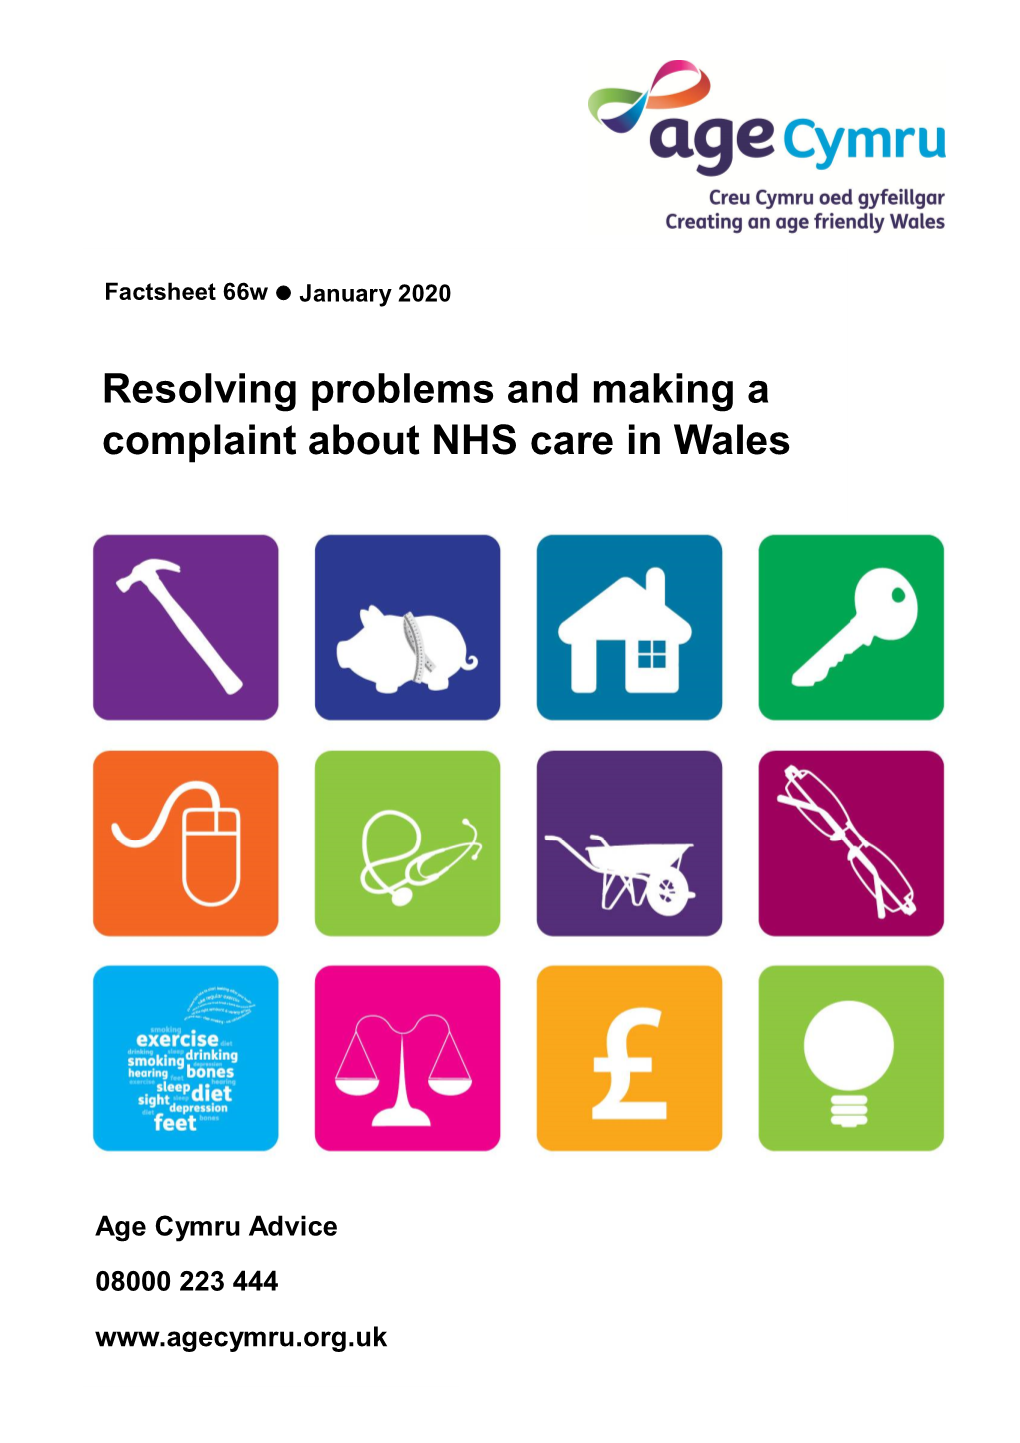 Factsheet 66W: Resolving Problems and Making a Complaint About NHS